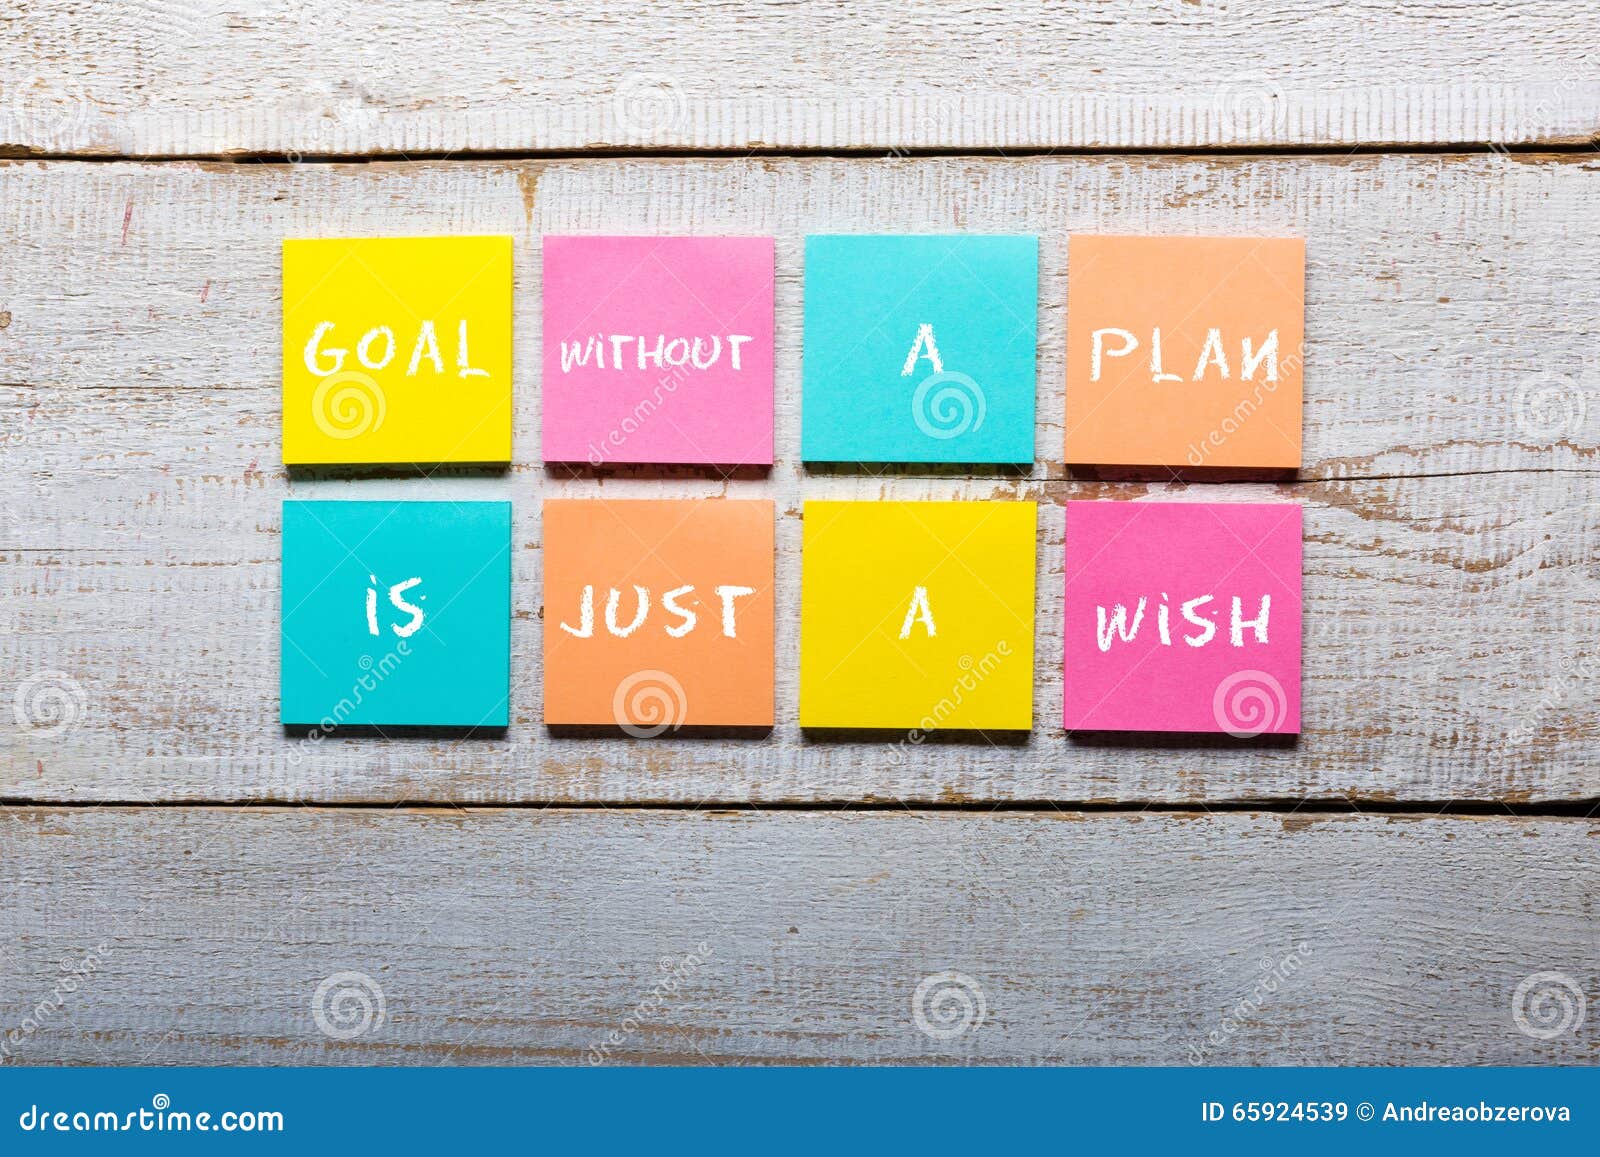 goal without a plan is just a wish - motivational handwriting